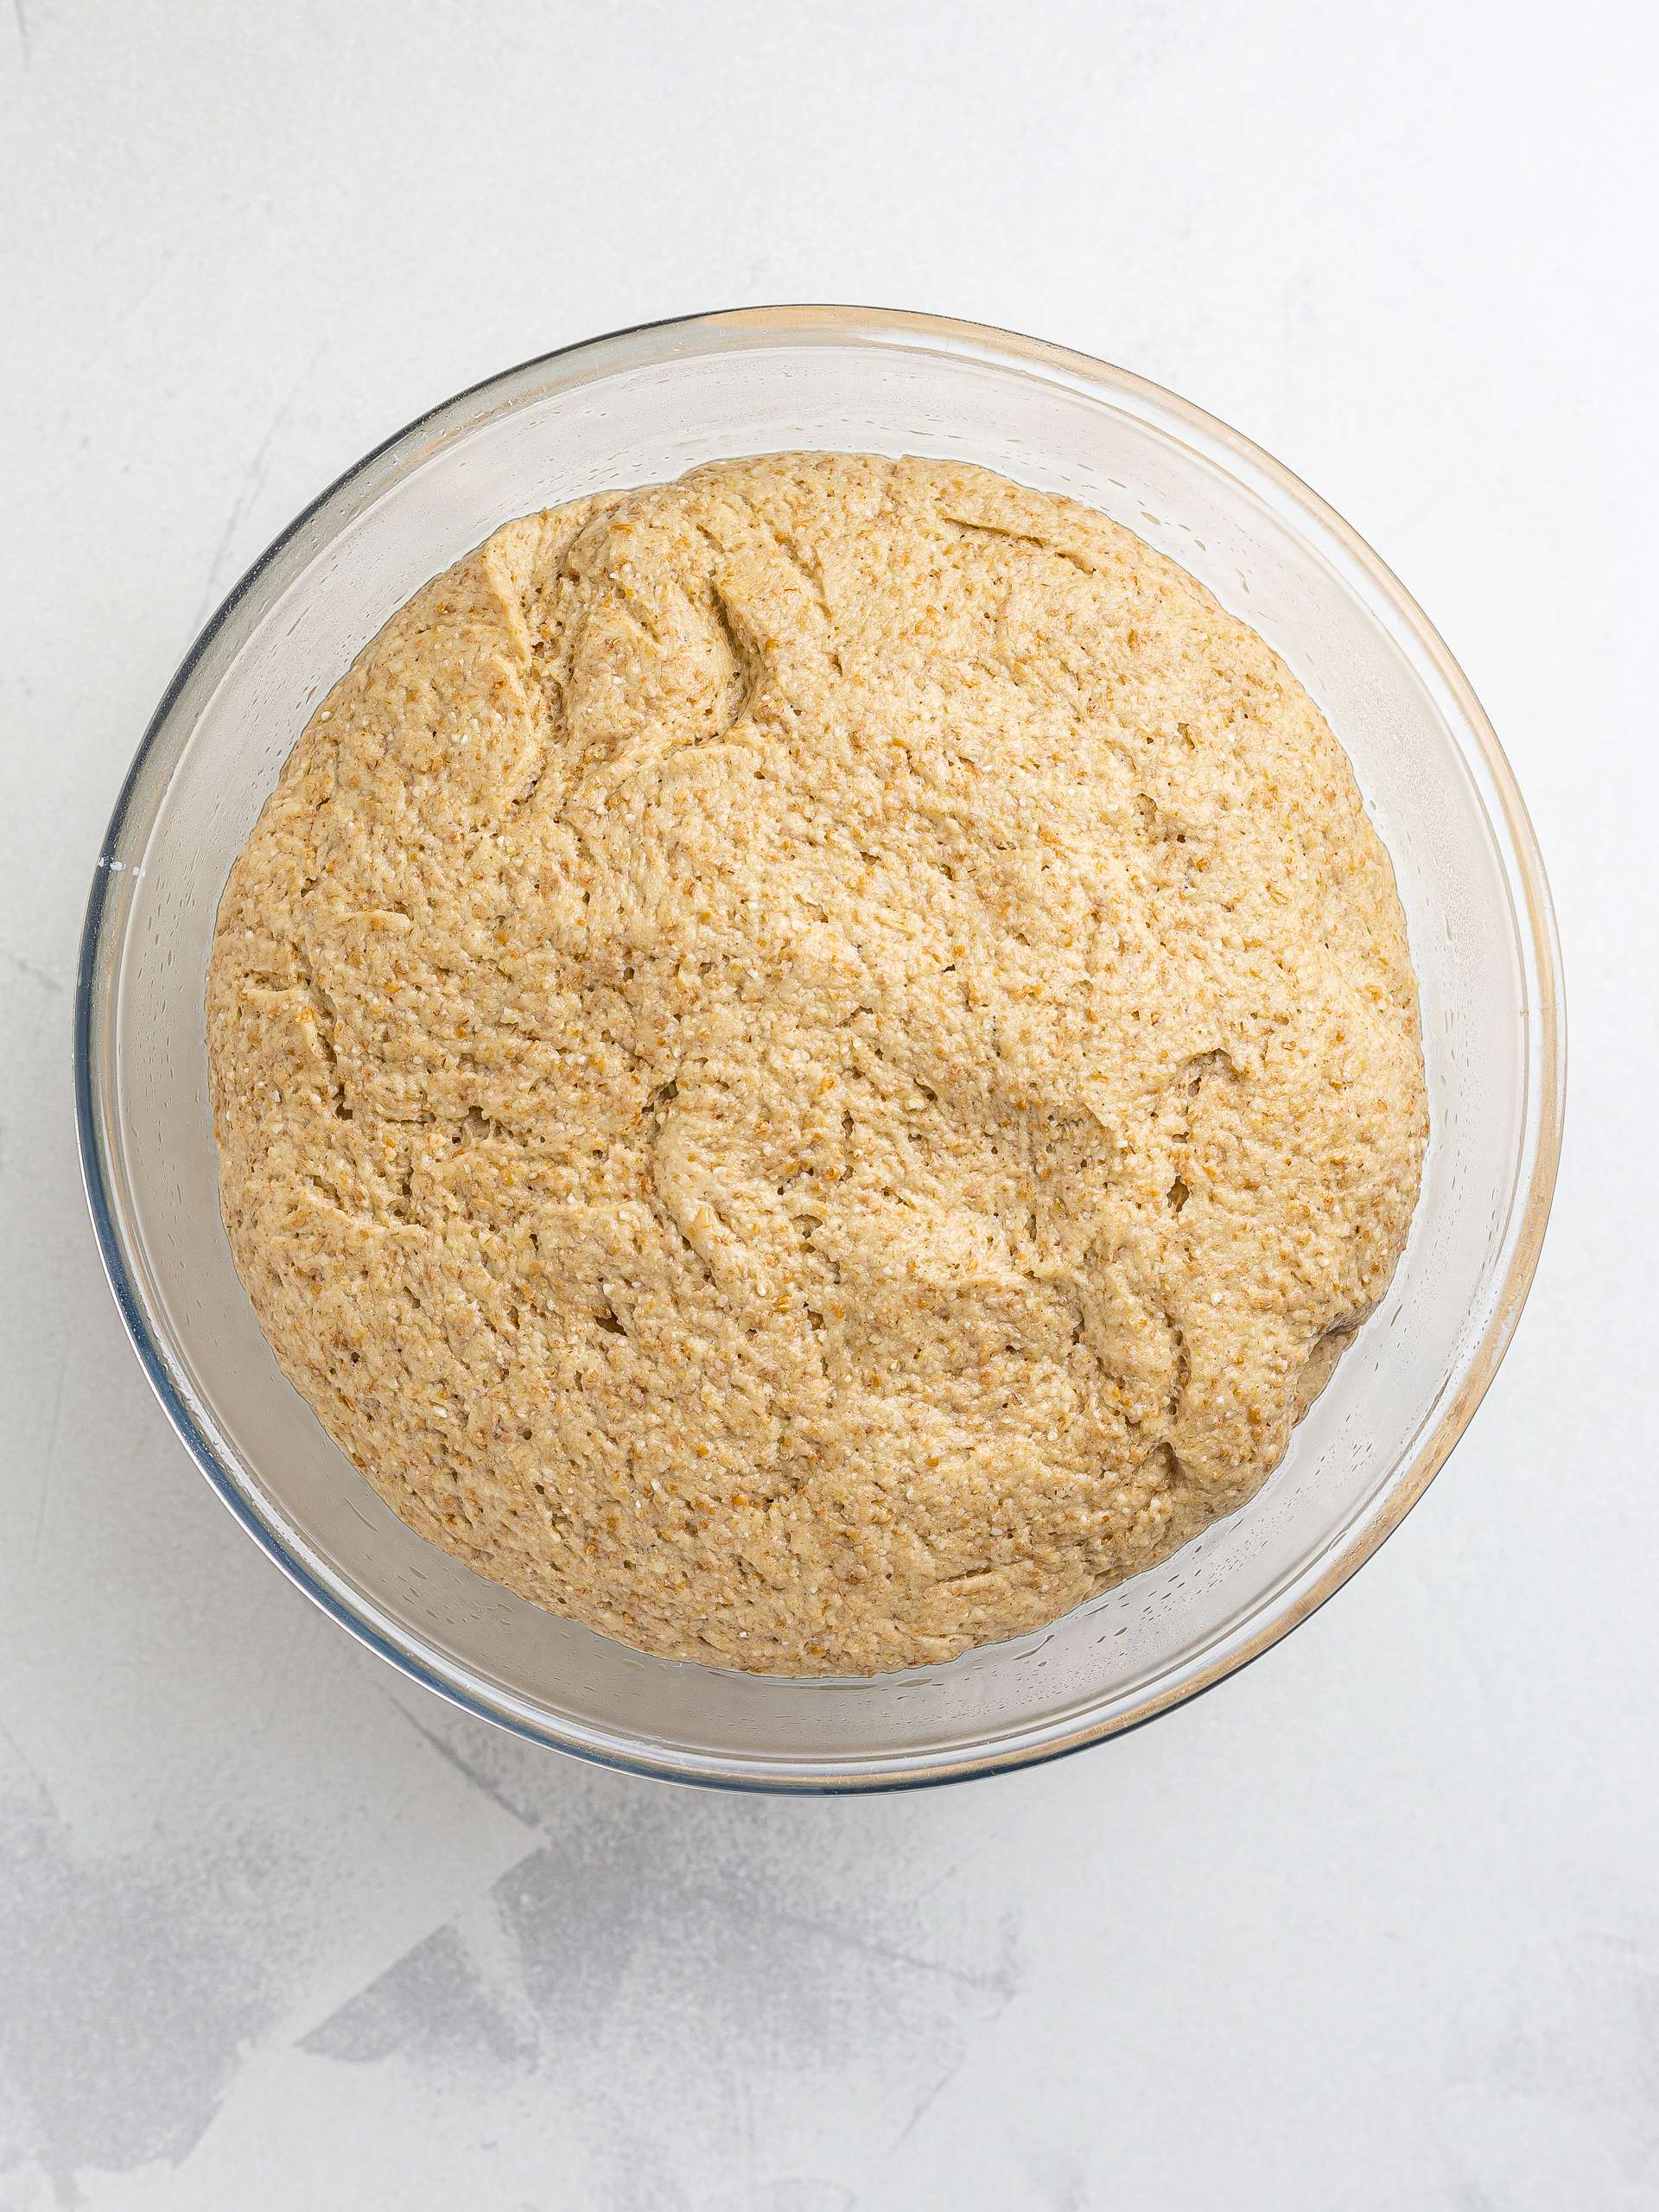 proved barley rusks dough in a bowl